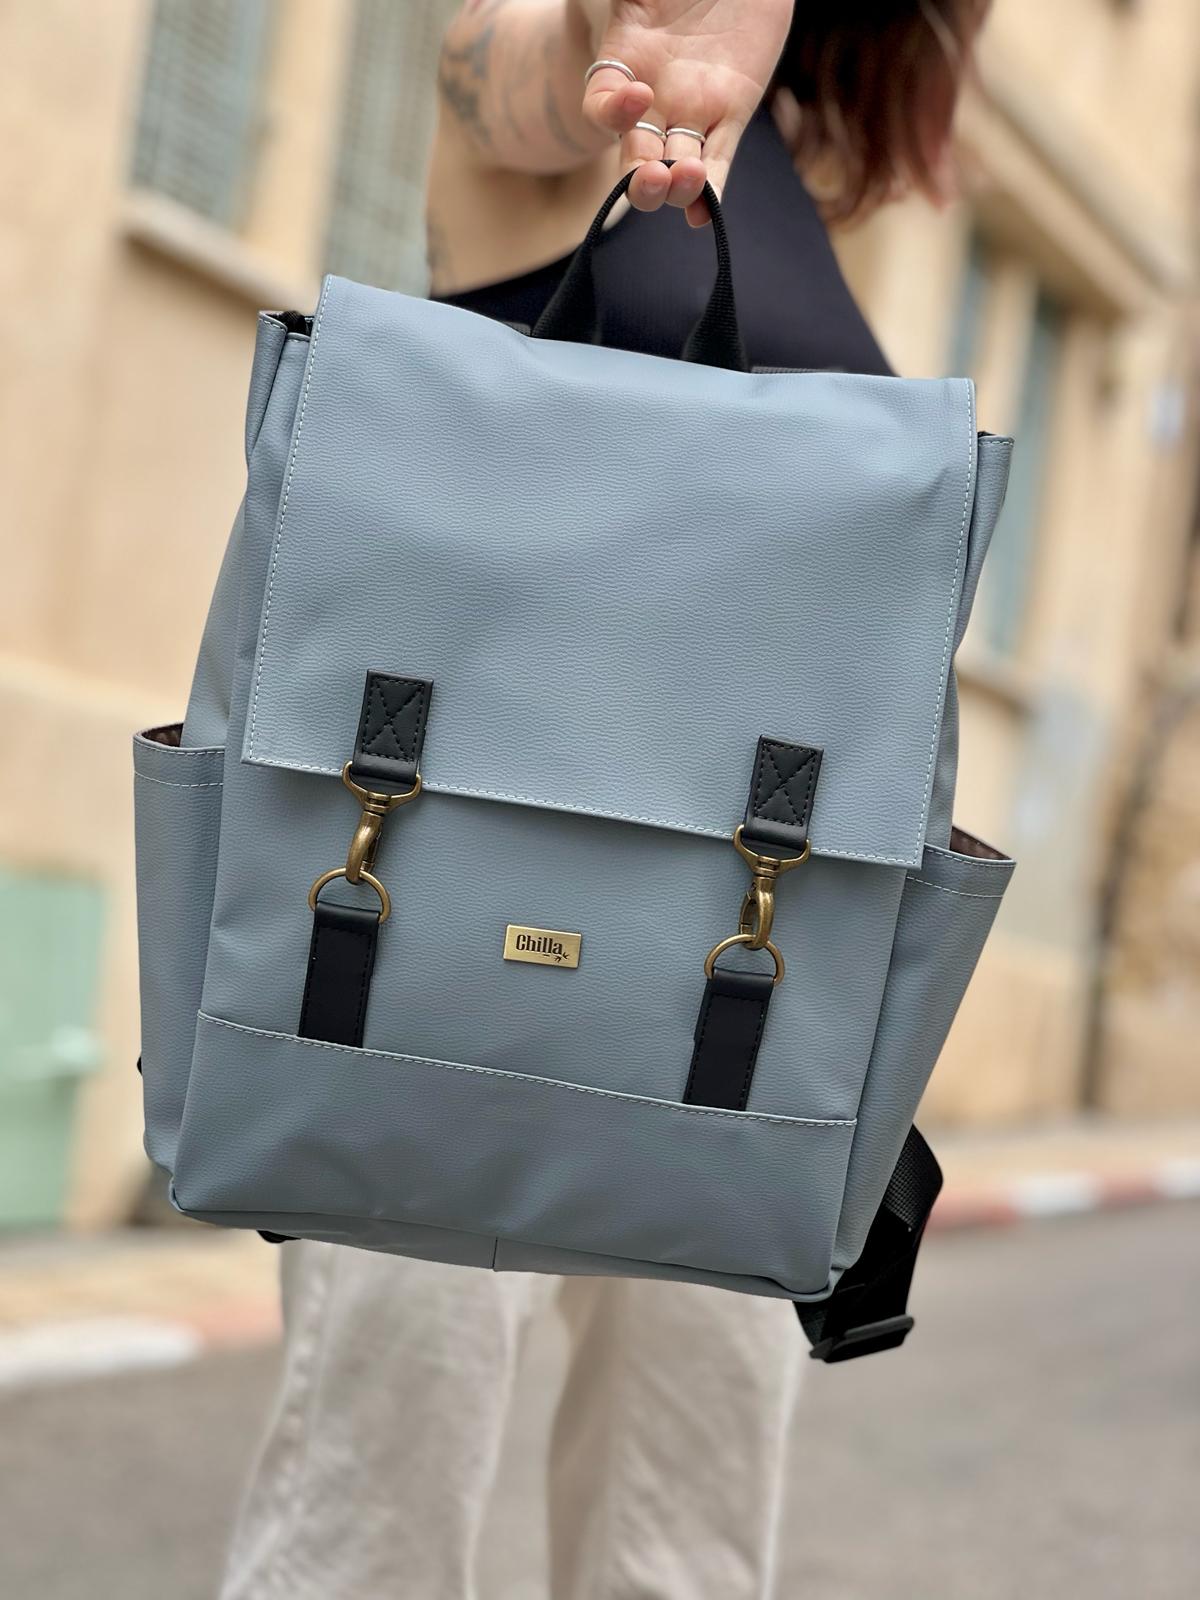 Textured Blue-Gray Unicorn Backpack